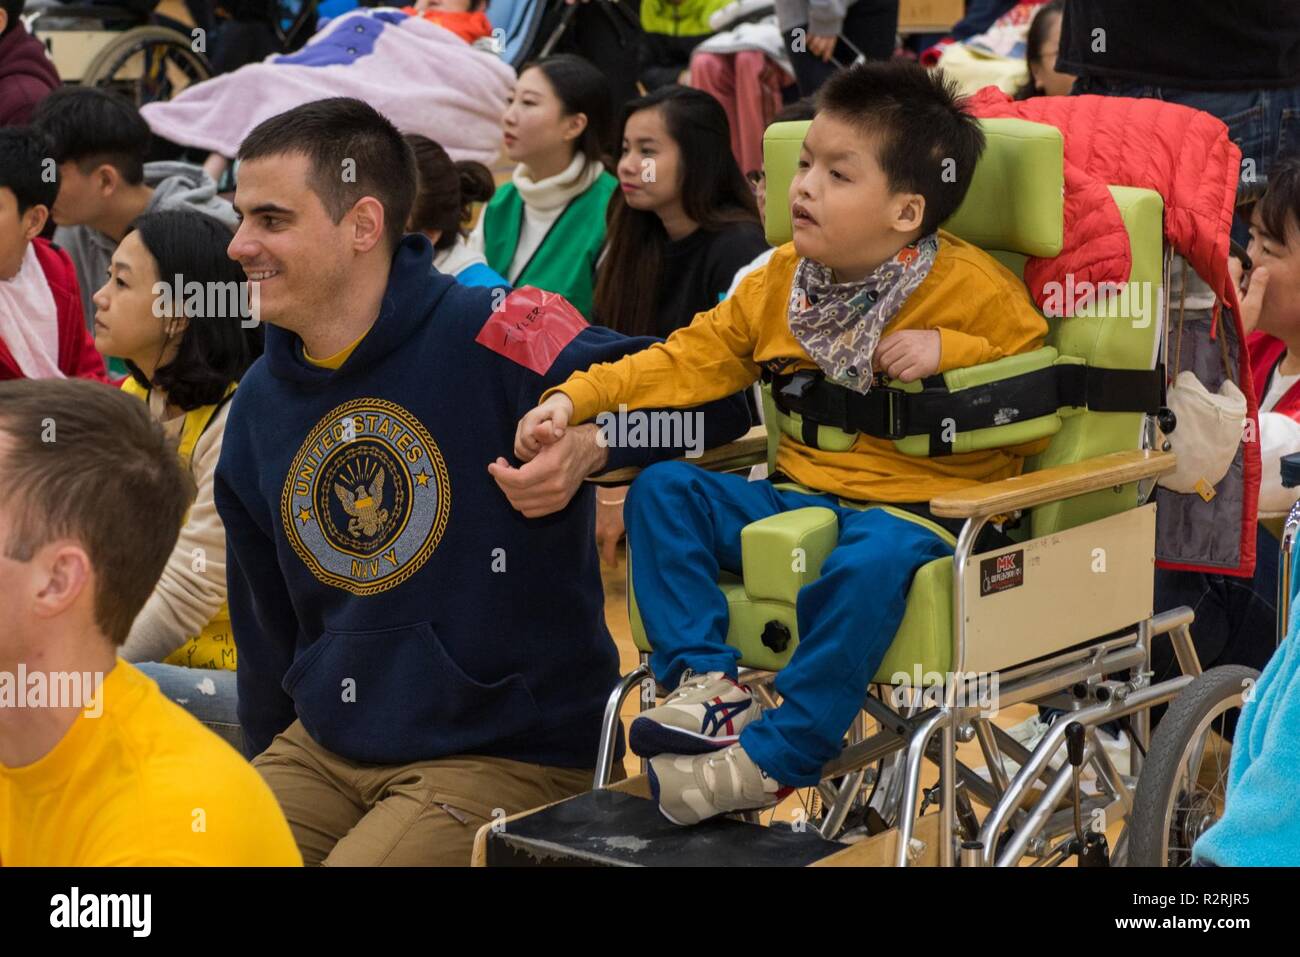 KOJE-DO, Republic of Korea (Nov. 03, 2018) Operations Specialist 2nd Class Tyler Whitney, assigned to Commander, U.S. Naval Forces Korea, participates in a community relations event with residents of the Aikwangwon Home and School for the Mentally and Physically Disabled in Koje-do. The U.S. Navy and Aikwangwon community outreach program spans more than 60 years and began when U.S. Navy doctors and nurses assigned to the U.S. Navy base in Chinhae volunteered at the home during the Korean War. Stock Photo